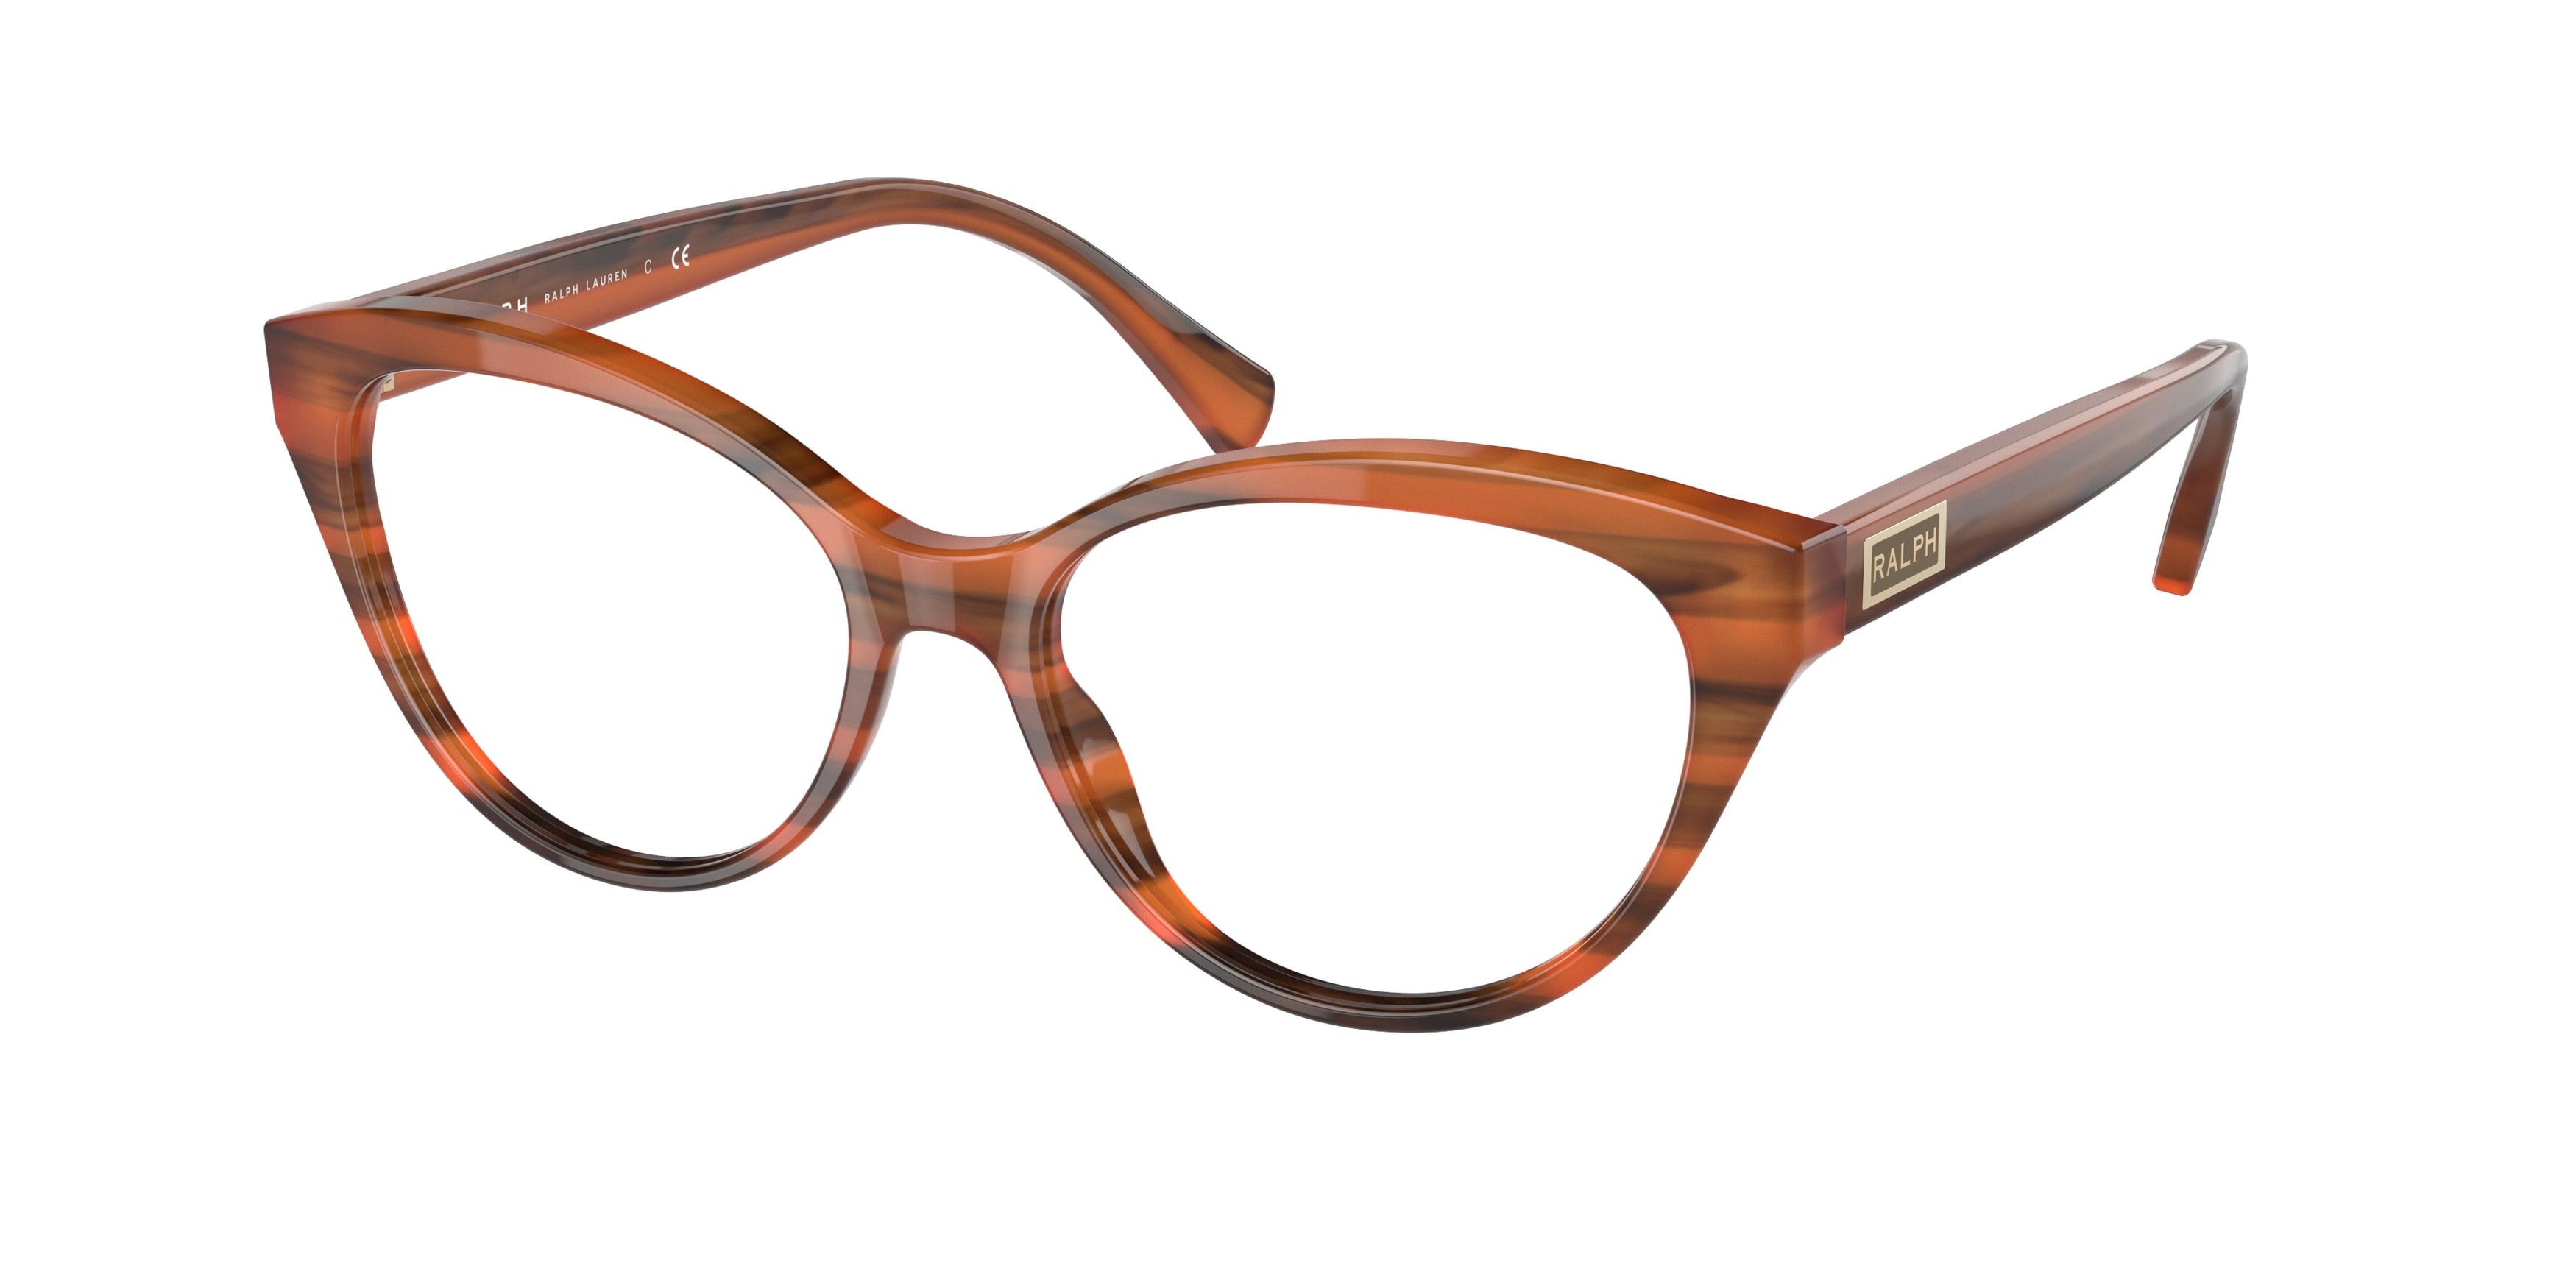 Ralph RA7116 Butterfly Eyeglasses  5986-Striped Brown 54-145-16 - Color Map Tortoise